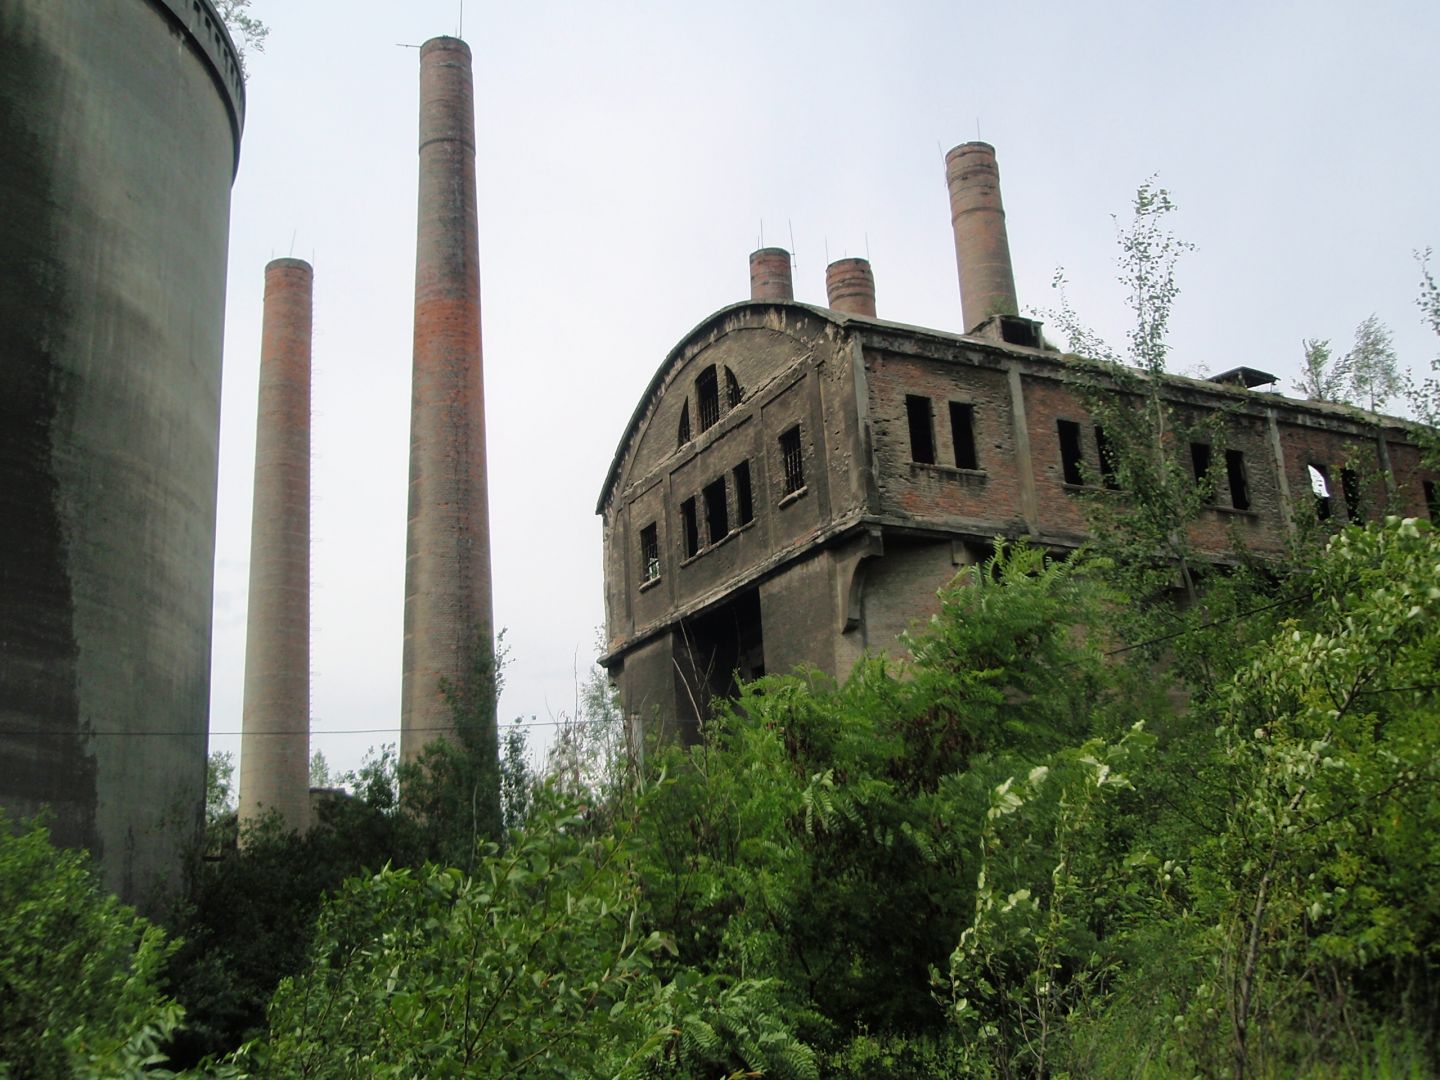 View of well-preserved chimneys